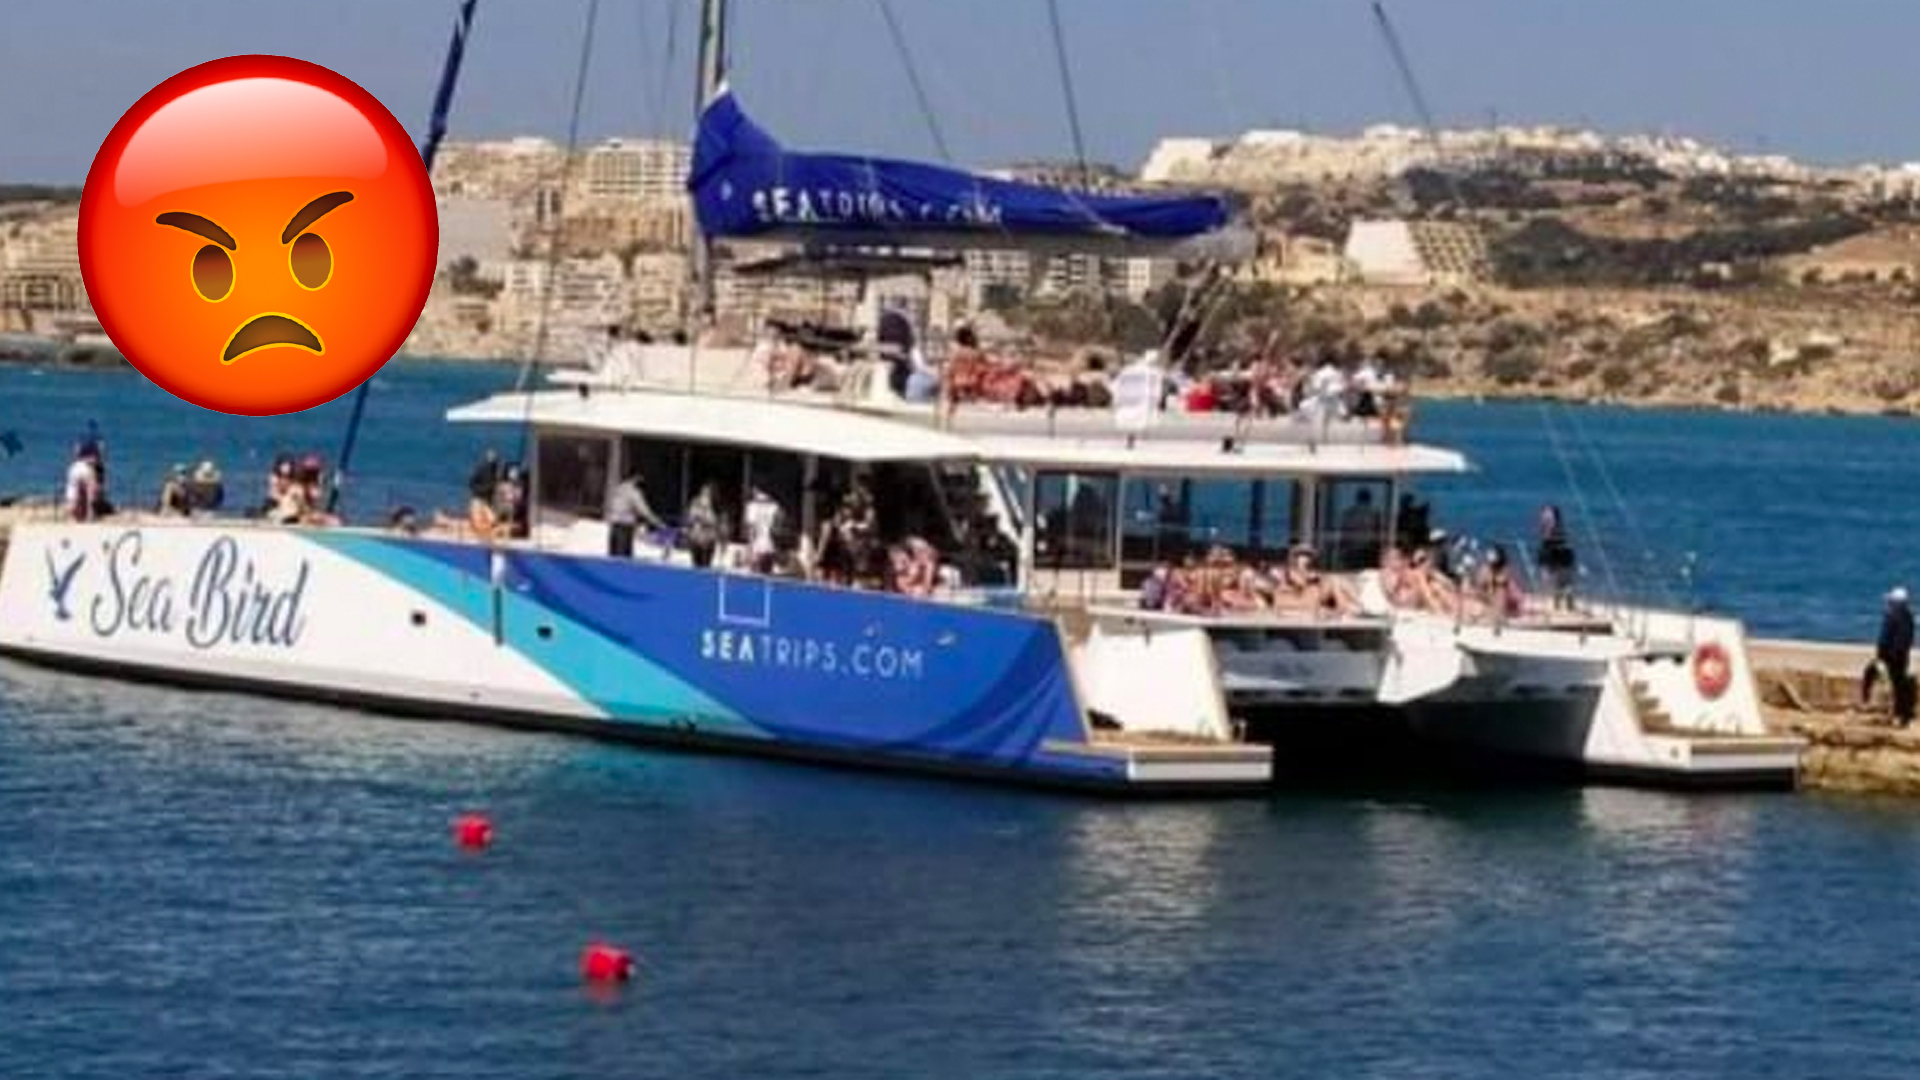 Comino boat party breaks several COVID-19 health restrictions